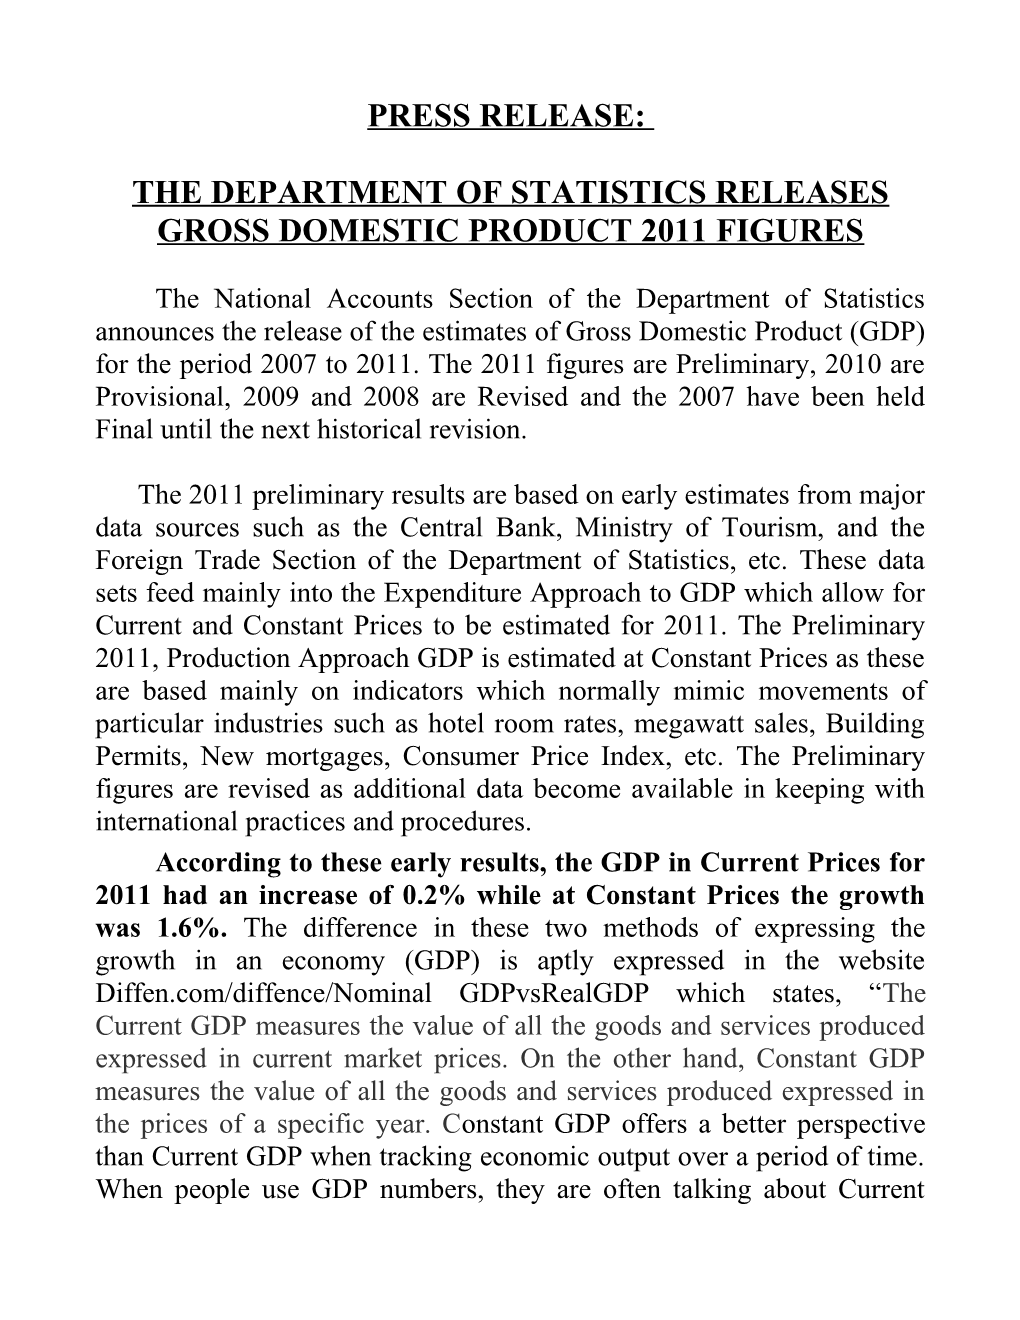 Press Release: the Department of Statistics Releases Gross Domestic Product 2011 Figures